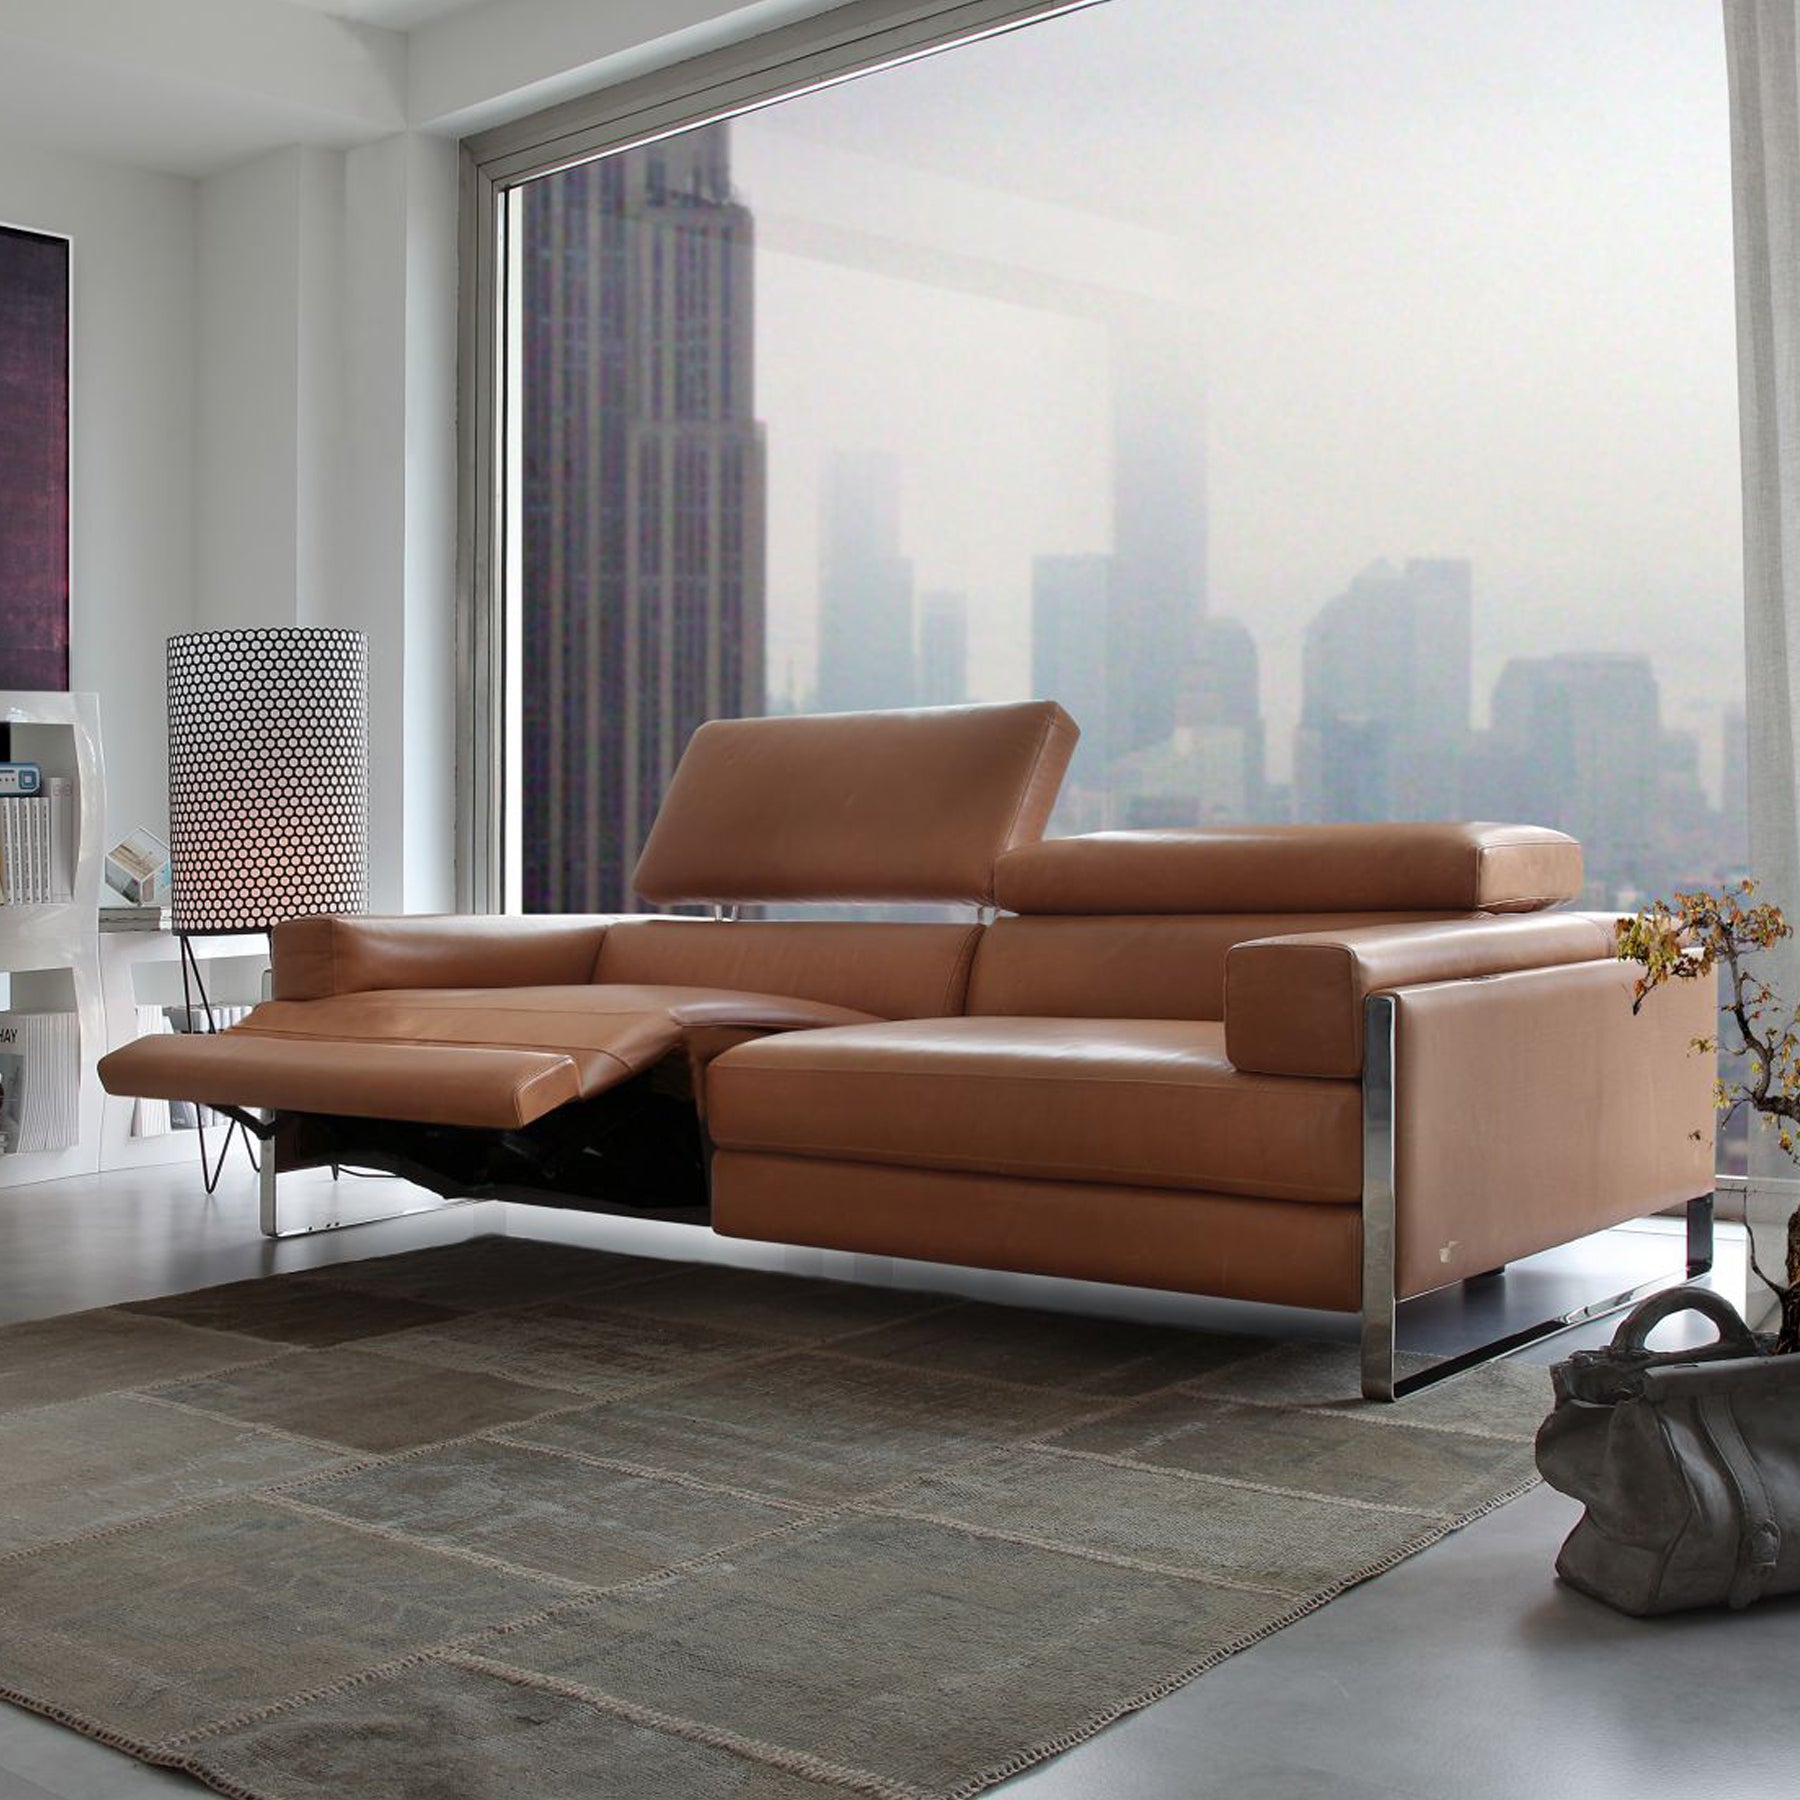 Romeo Relax Leather 2 Seater